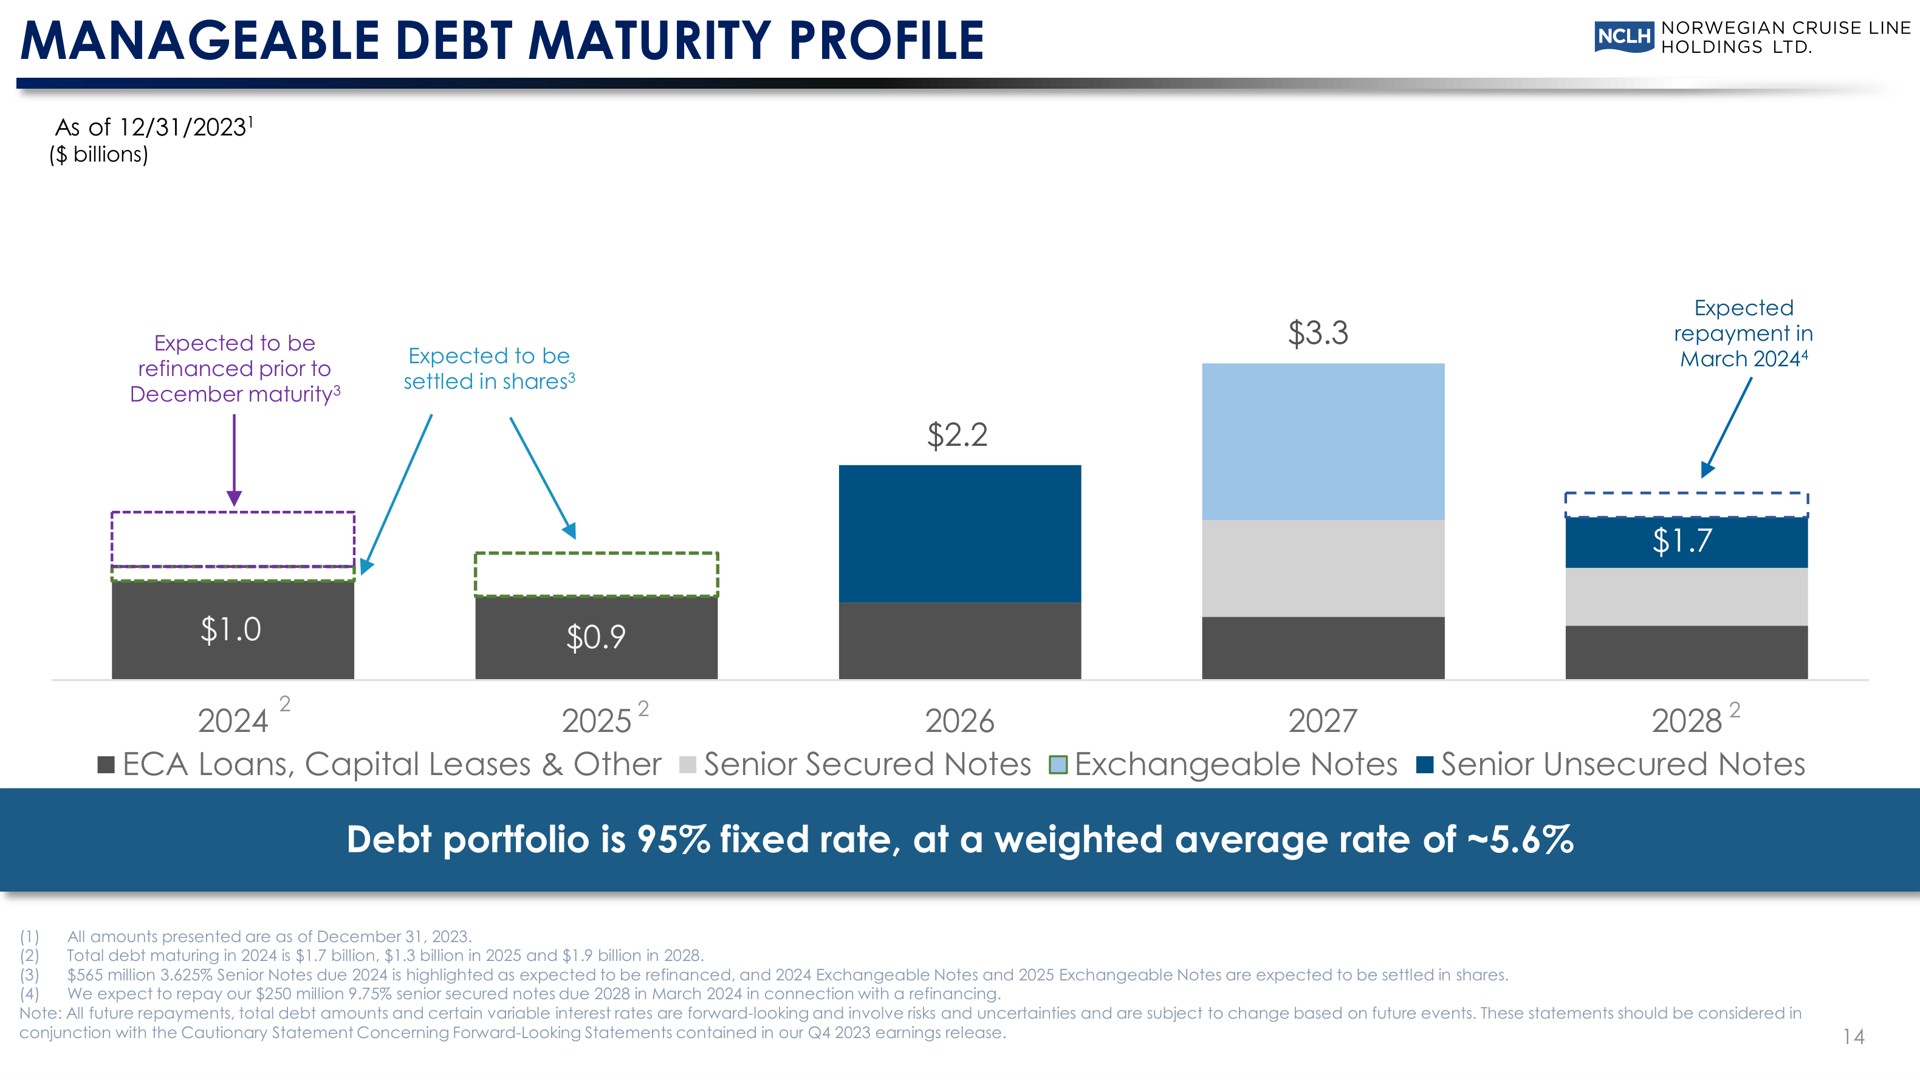 manageable debt maturity profile debt portfolio is fixed rate at a weighted average rate of yor cruise line | Norwegian Cruise Line